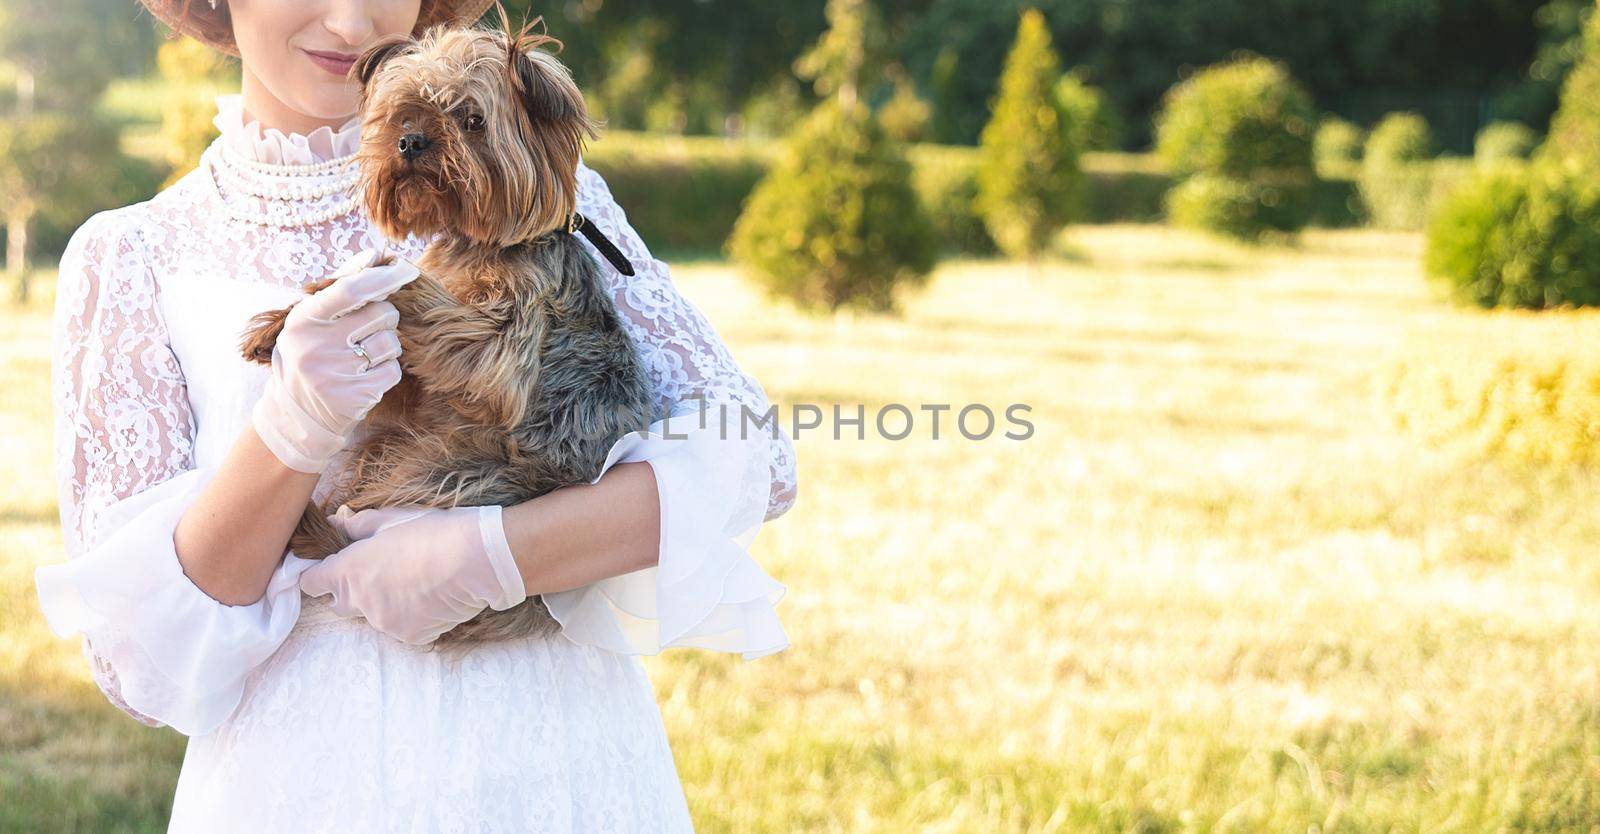 Retro portrait of a beautiful woman holding Yorkshire terrier